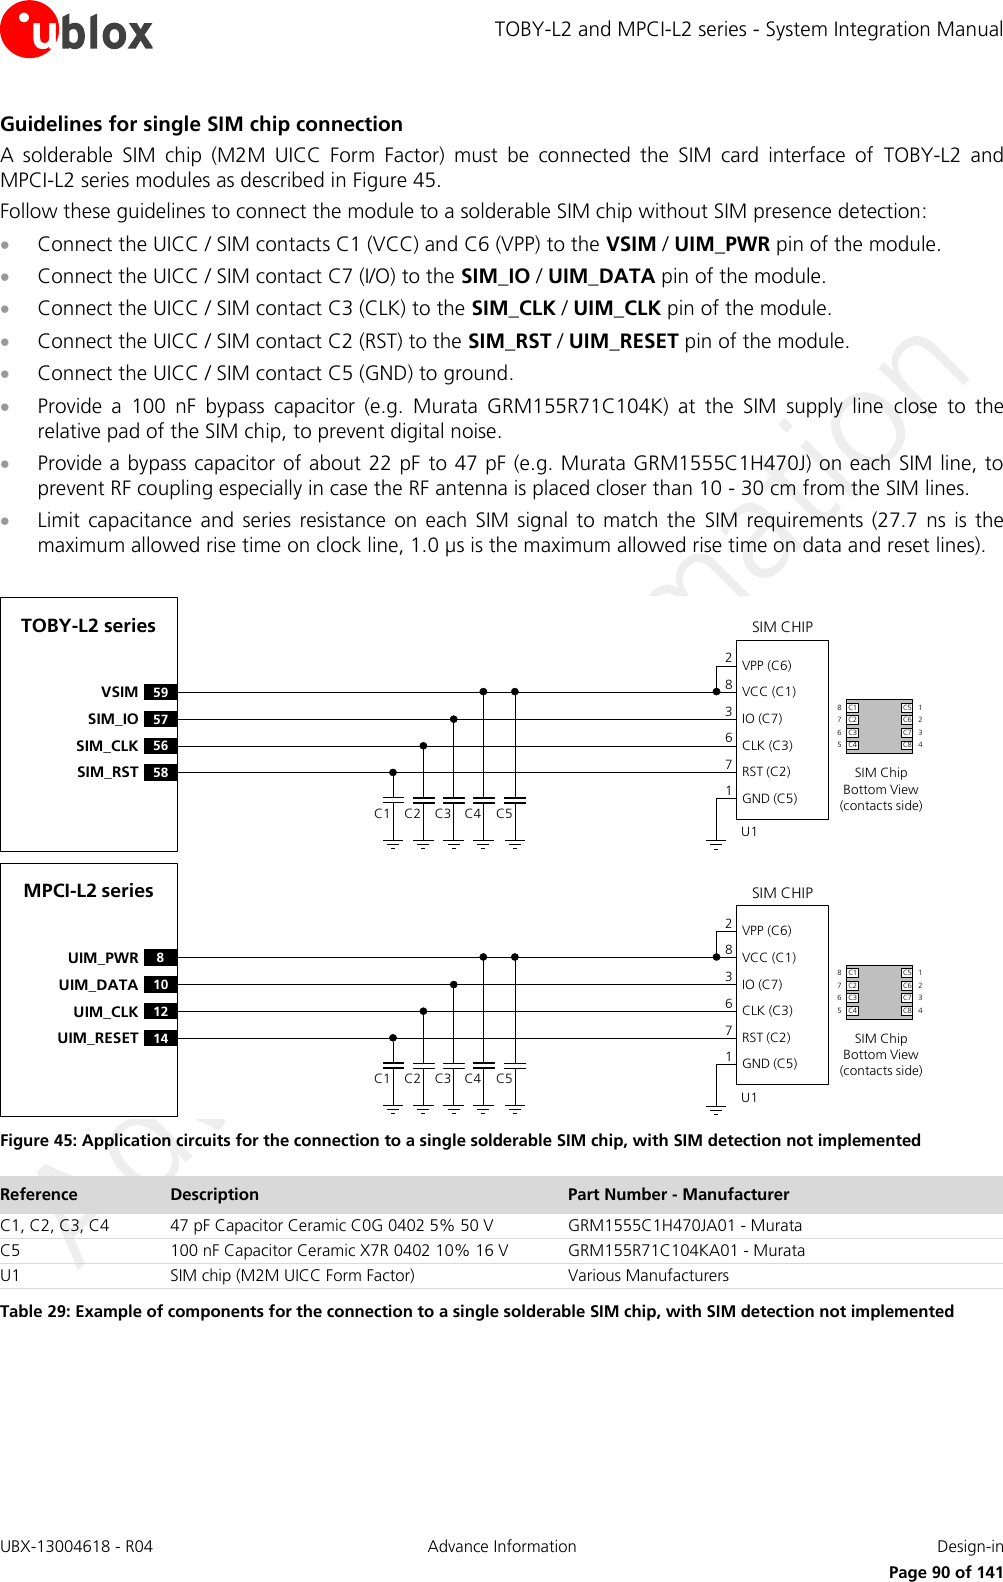 TOBY-L2 and MPCI-L2 series - System Integration Manual UBX-13004618 - R04  Advance Information  Design-in     Page 90 of 141 Guidelines for single SIM chip connection A  solderable  SIM  chip  (M2M  UICC  Form  Factor)  must  be  connected  the  SIM  card  interface  of  TOBY-L2  and MPCI-L2 series modules as described in Figure 45. Follow these guidelines to connect the module to a solderable SIM chip without SIM presence detection:  Connect the UICC / SIM contacts C1 (VCC) and C6 (VPP) to the VSIM / UIM_PWR pin of the module.  Connect the UICC / SIM contact C7 (I/O) to the SIM_IO / UIM_DATA pin of the module.  Connect the UICC / SIM contact C3 (CLK) to the SIM_CLK / UIM_CLK pin of the module.  Connect the UICC / SIM contact C2 (RST) to the SIM_RST / UIM_RESET pin of the module.  Connect the UICC / SIM contact C5 (GND) to ground.  Provide  a  100  nF  bypass  capacitor  (e.g.  Murata  GRM155R71C104K)  at  the  SIM  supply  line  close  to  the relative pad of the SIM chip, to prevent digital noise.   Provide a bypass capacitor of about 22 pF to 47 pF (e.g. Murata GRM1555C1H470J) on each SIM line, to prevent RF coupling especially in case the RF antenna is placed closer than 10 - 30 cm from the SIM lines.  Limit capacitance  and  series  resistance  on each  SIM  signal to match  the  SIM requirements  (27.7  ns  is the maximum allowed rise time on clock line, 1.0 µs is the maximum allowed rise time on data and reset lines).  TOBY-L2 series59VSIM57SIM_IO56SIM_CLK58SIM_RSTSIM CHIPSIM ChipBottom View (contacts side)C1VPP (C6)VCC (C1)IO (C7)CLK (C3)RST (C2)GND (C5)C2 C3 C5U1C4283671C1 C5C2 C6C3 C7C4 C887651234MPCI-L2 series8UIM_PWR10UIM_DATA12UIM_CLK14UIM_RESETSIM CHIPSIM ChipBottom View (contacts side)C1VPP (C6)VCC (C1)IO (C7)CLK (C3)RST (C2)GND (C5)C2 C3 C5U1C4283671C1 C5C2 C6C3 C7C4 C887651234 Figure 45: Application circuits for the connection to a single solderable SIM chip, with SIM detection not implemented Reference Description Part Number - Manufacturer C1, C2, C3, C4 47 pF Capacitor Ceramic C0G 0402 5% 50 V GRM1555C1H470JA01 - Murata C5 100 nF Capacitor Ceramic X7R 0402 10% 16 V GRM155R71C104KA01 - Murata U1 SIM chip (M2M UICC Form Factor) Various Manufacturers Table 29: Example of components for the connection to a single solderable SIM chip, with SIM detection not implemented  